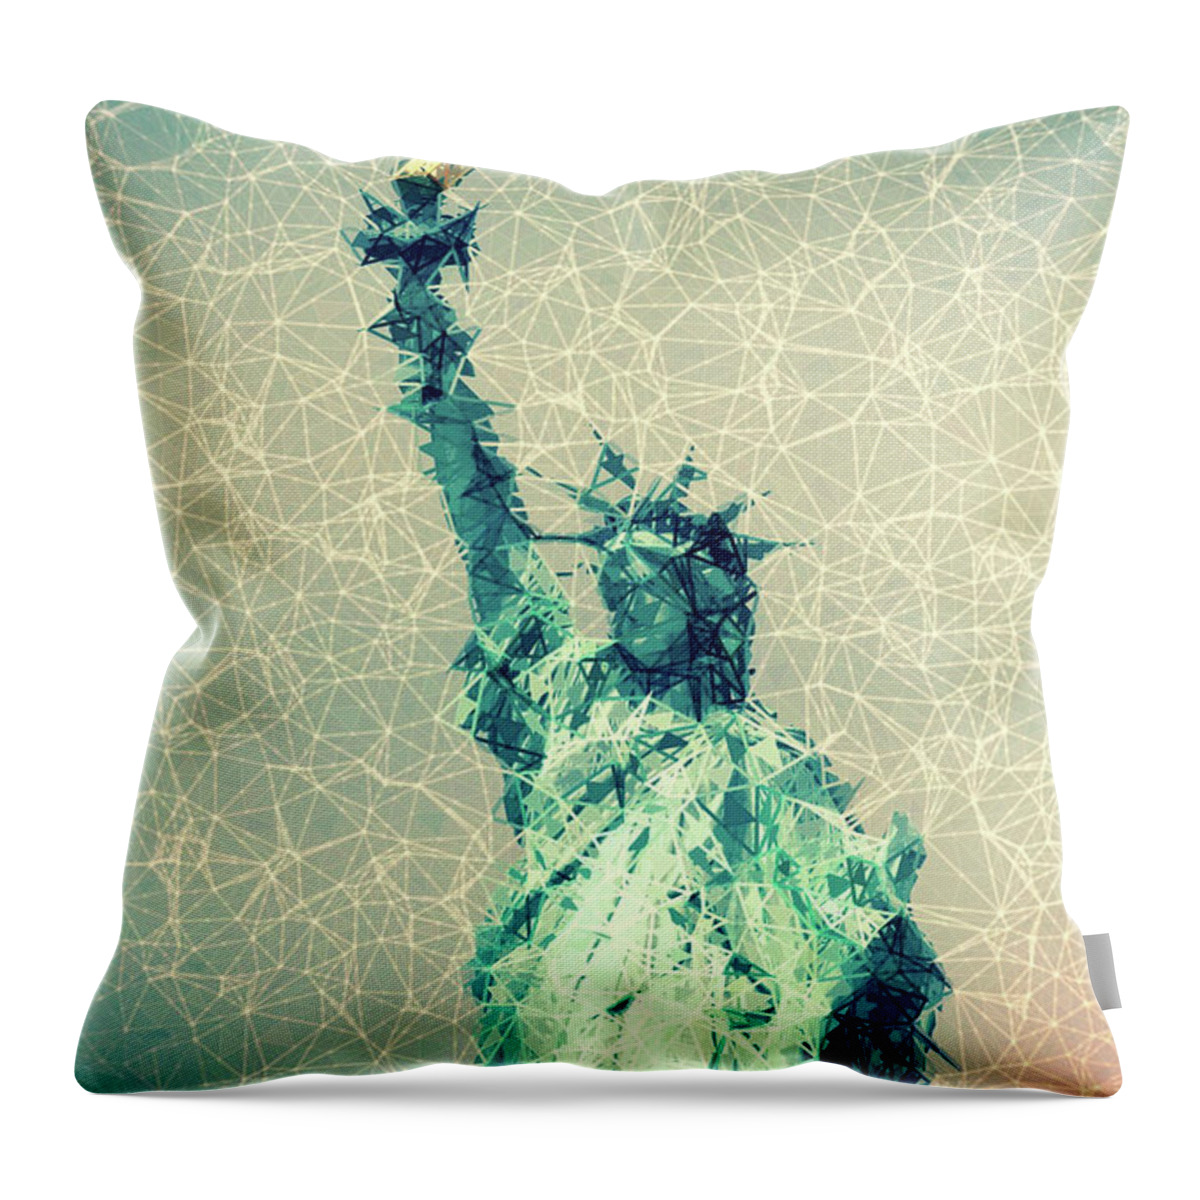 Lady Liberty Throw Pillow featuring the digital art Lady Liberty #1 by Prince Andre Faubert